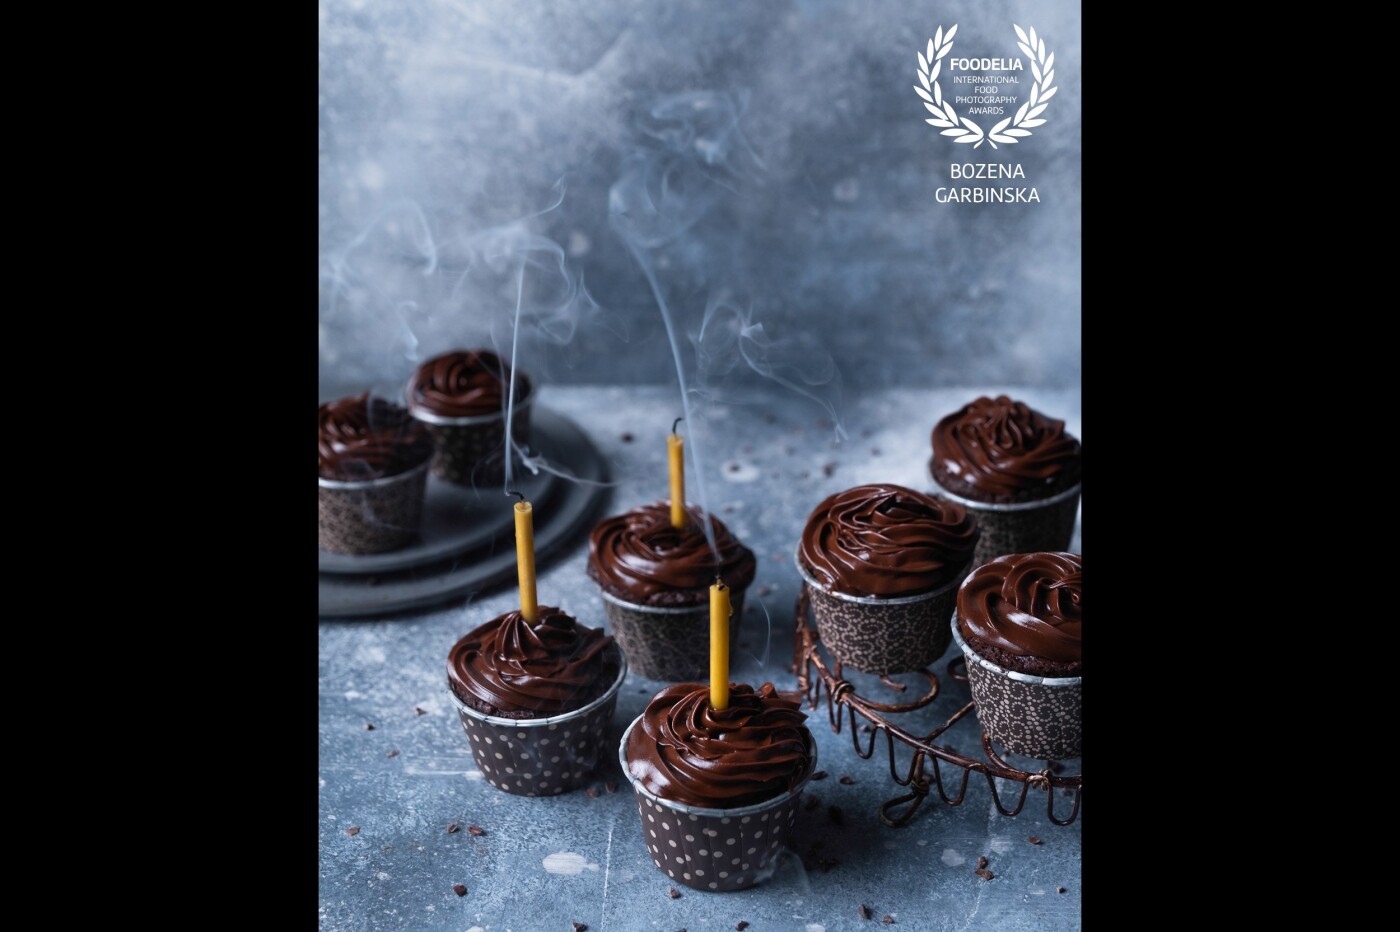 Gluten-free beetroot chocolate muffins with chocolate frosting. In the version with candles, they can replace a birthday cake.<br />
Camera: Fuji X-T3.<br />
